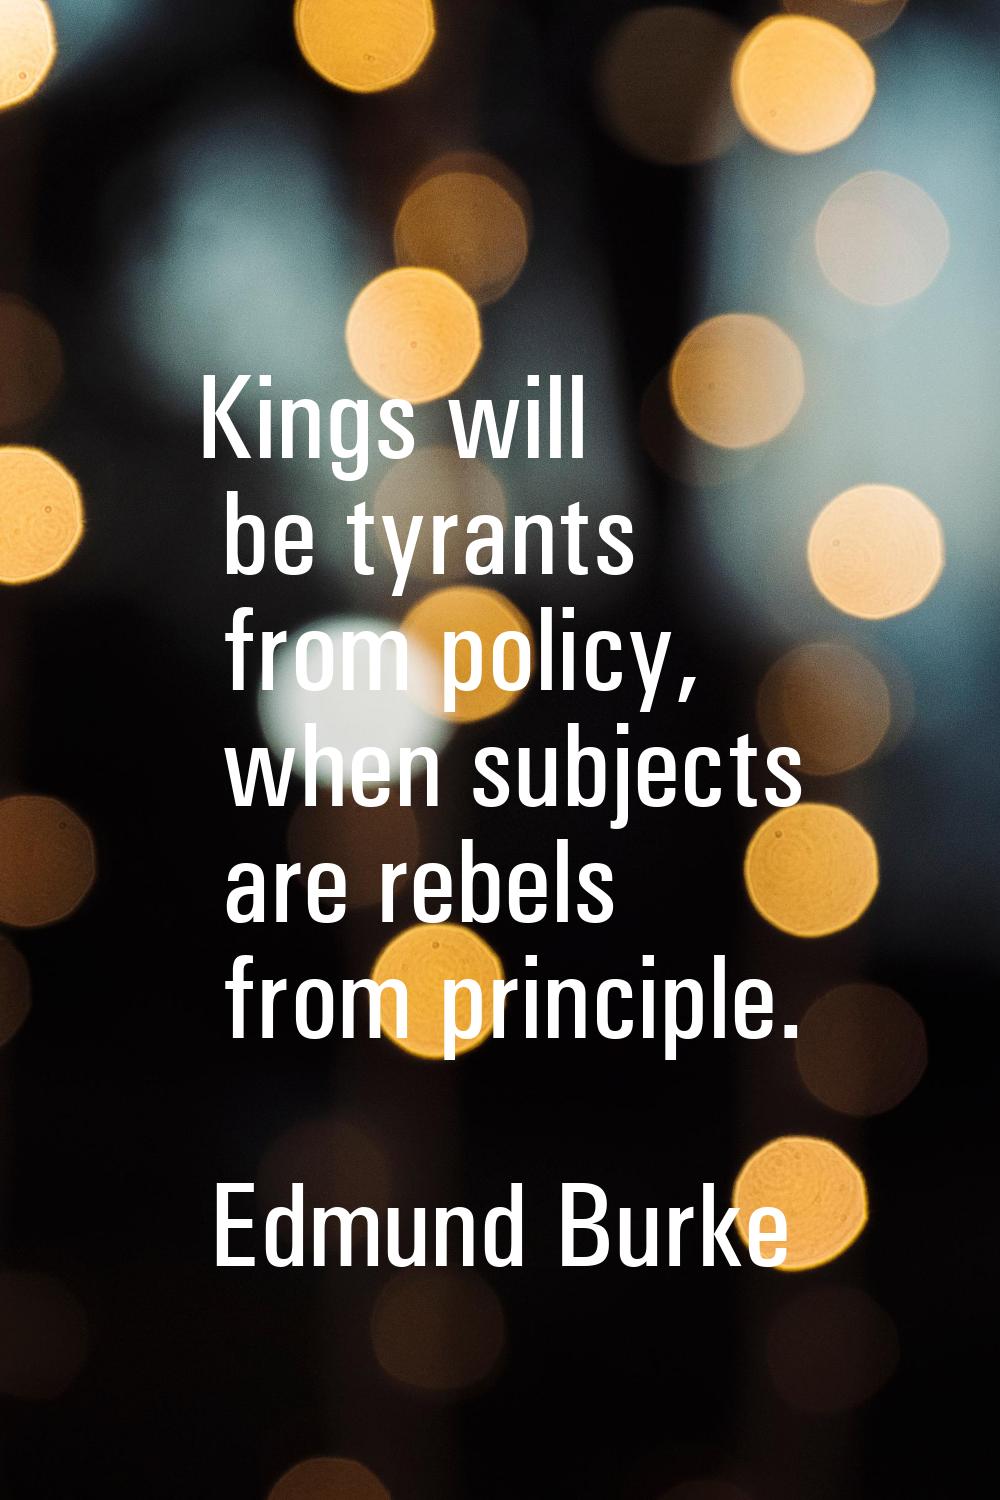 Kings will be tyrants from policy, when subjects are rebels from principle.